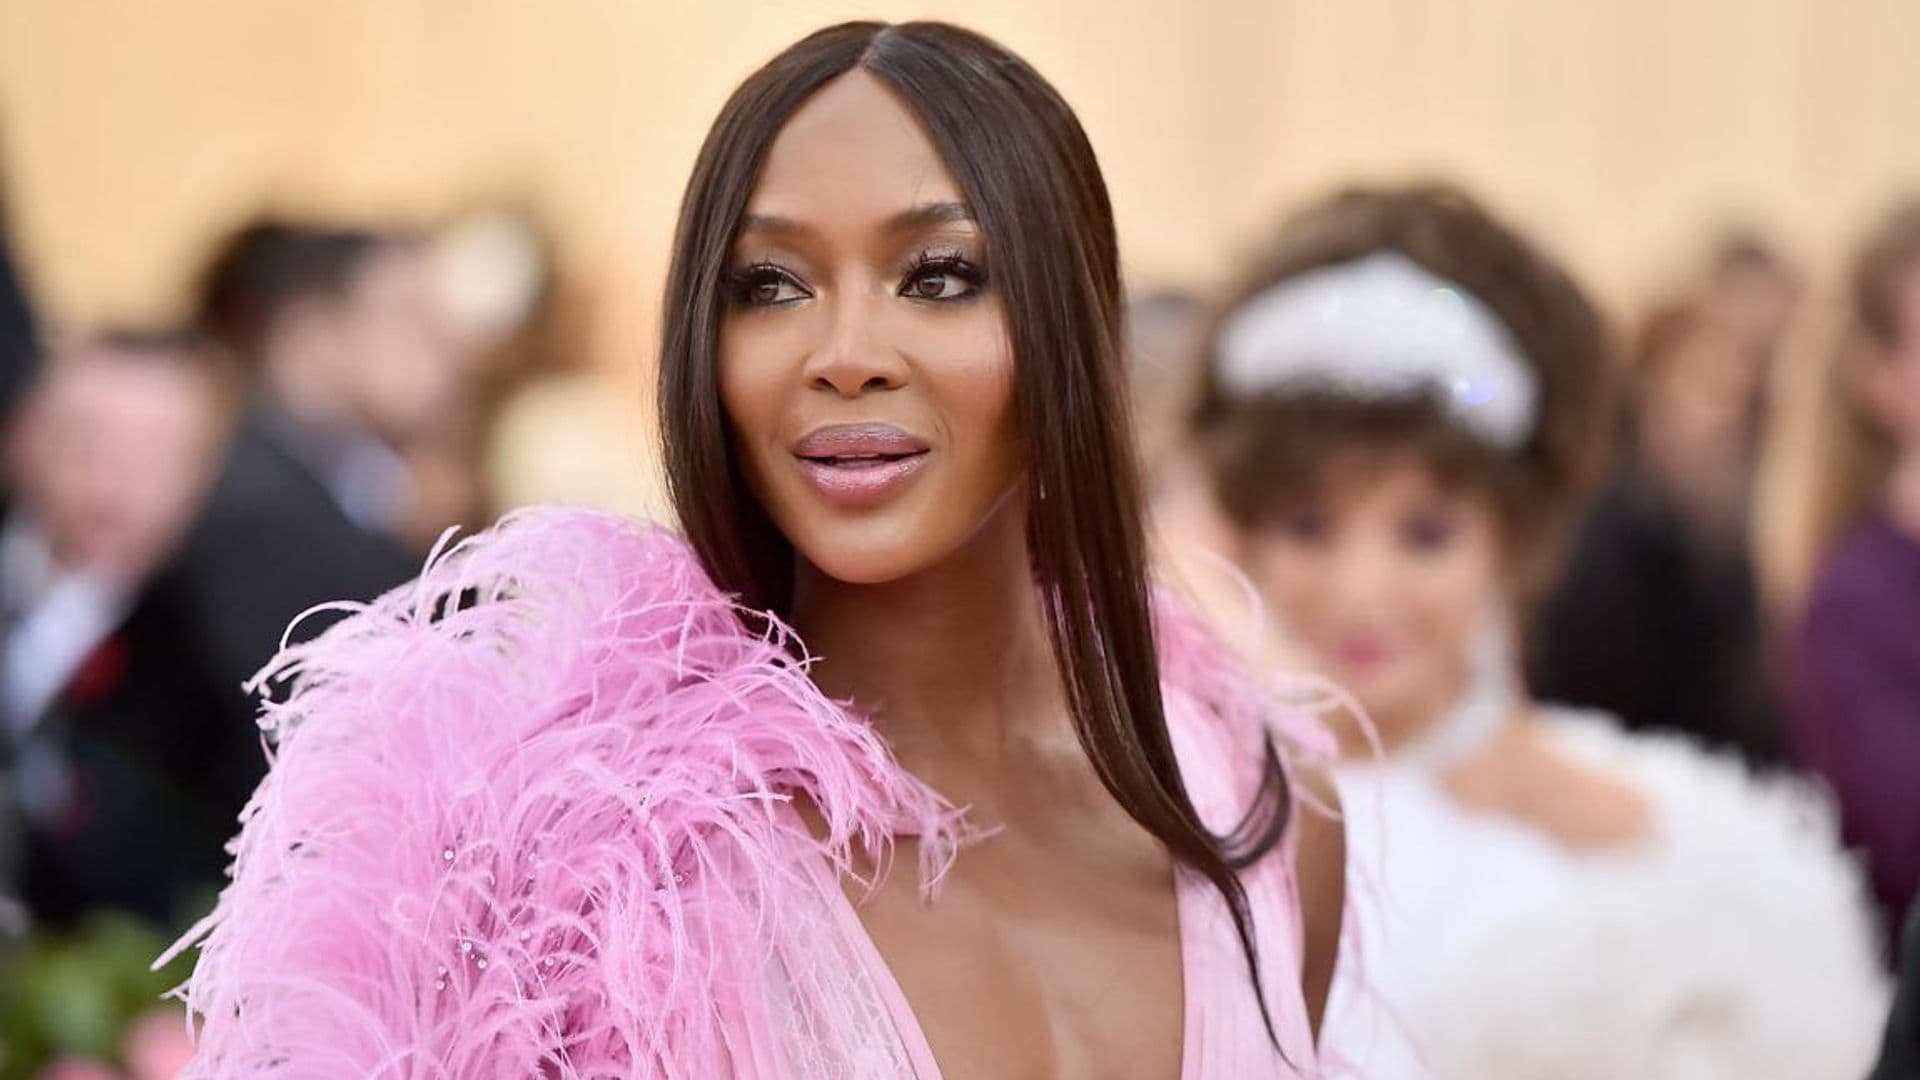 Naomi Campbell becomes the new global face and muse of Pat McGrath Cosmetics